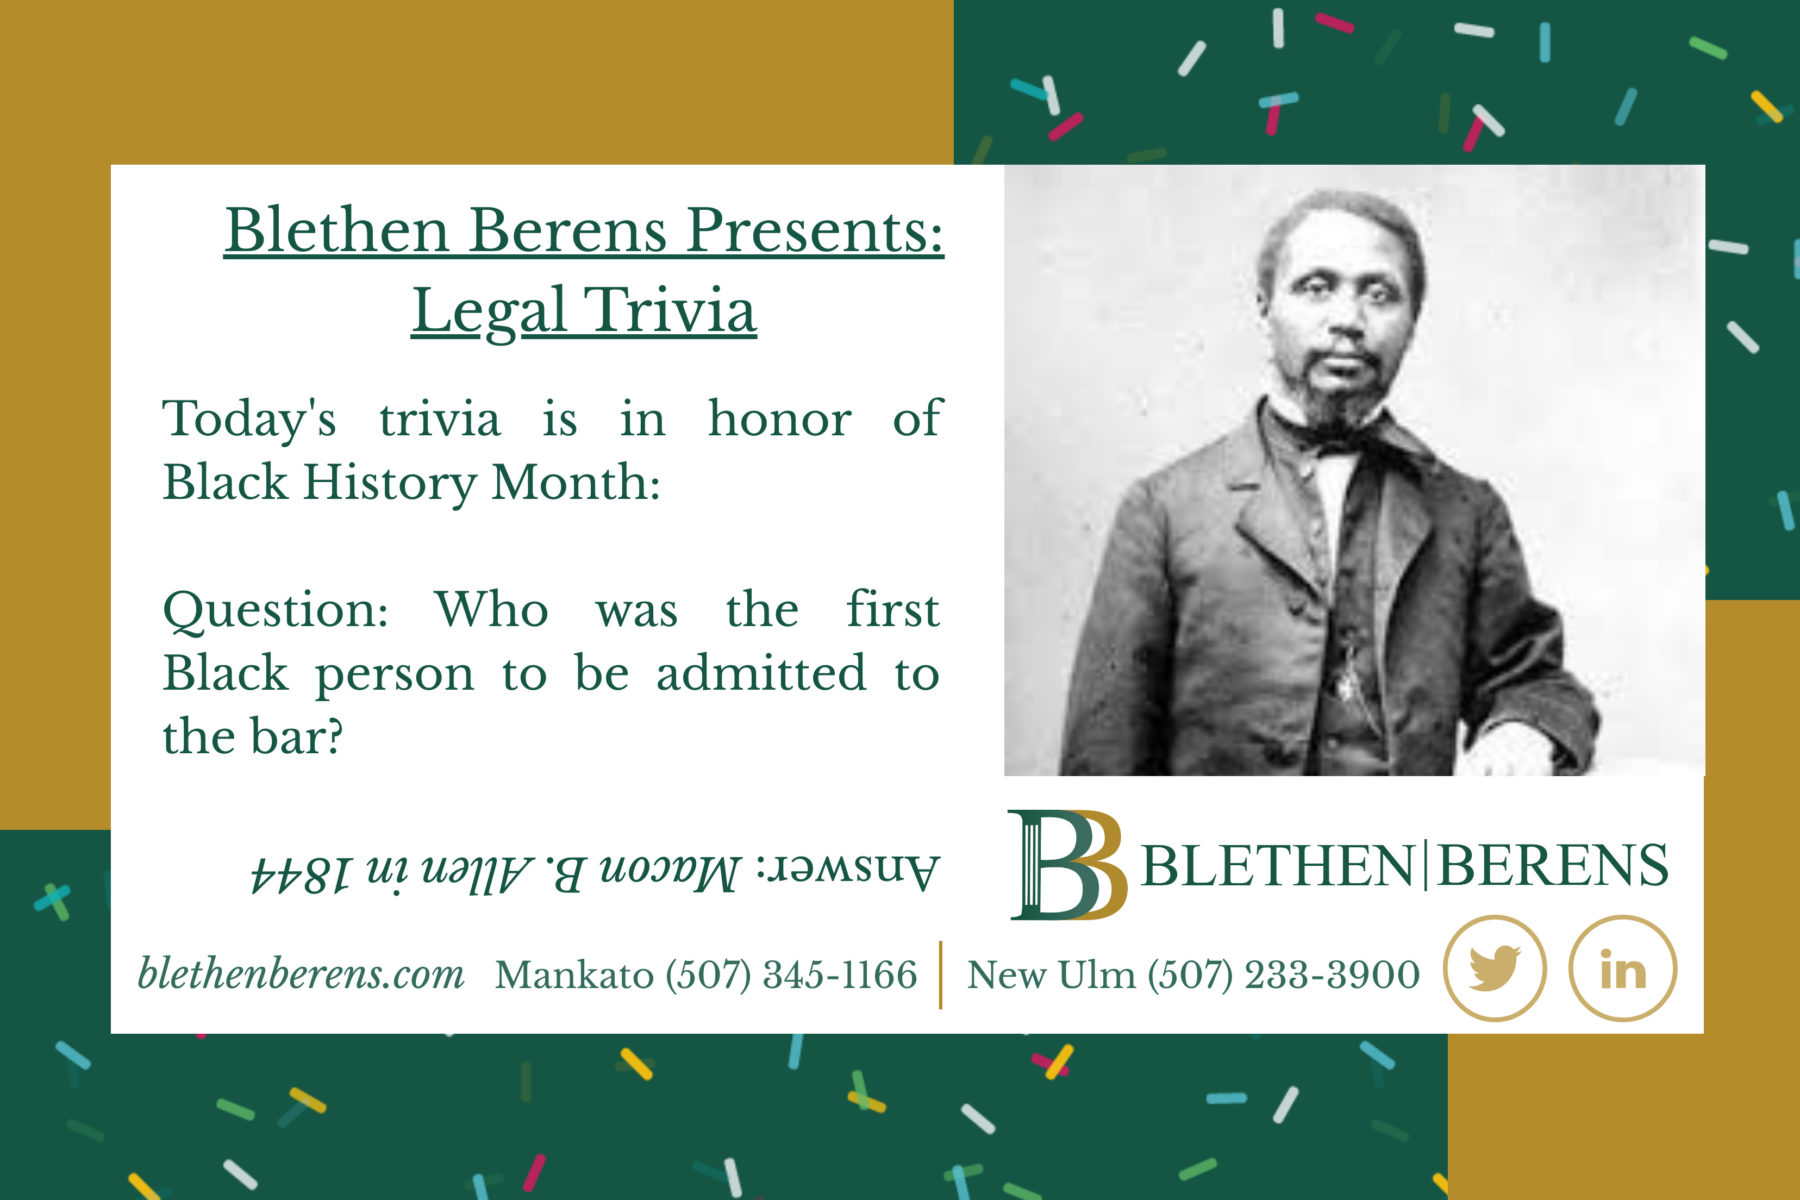 Who was the first Black person to be admitted to the bar? Macon B. Allen in 1844. Portrait of Macon B. Allen.